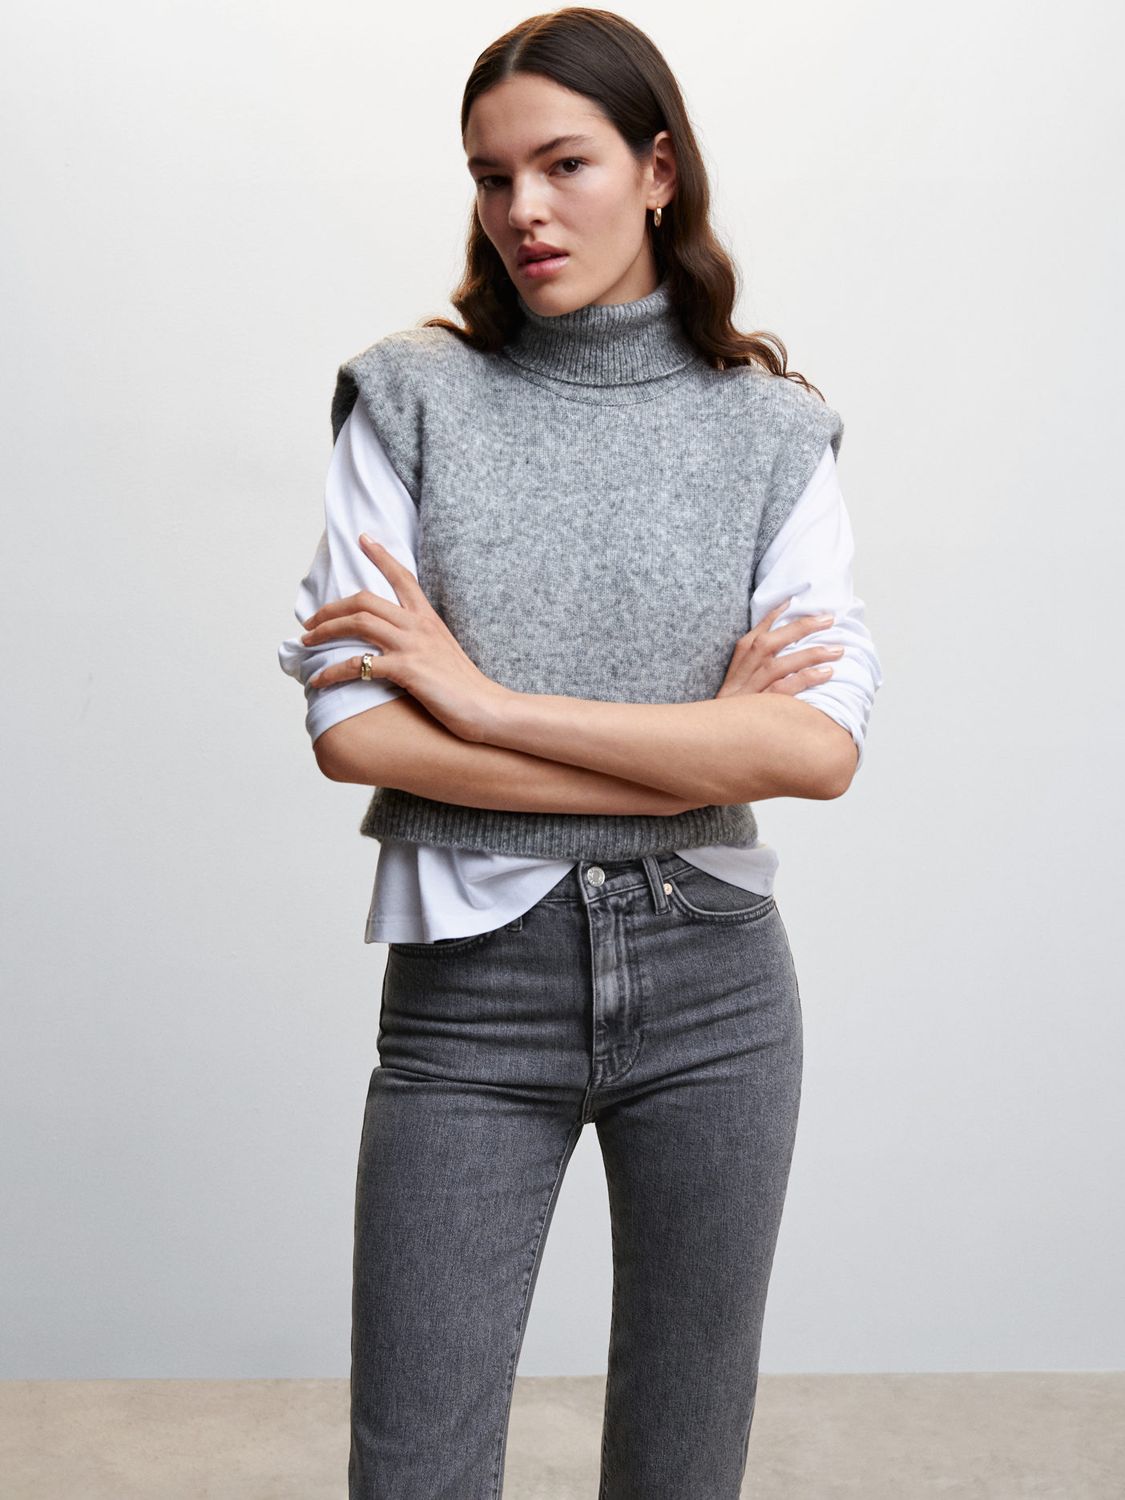 Mango Claudia Slim Fit Cropped Jeans, Open Grey at John Lewis & Partners